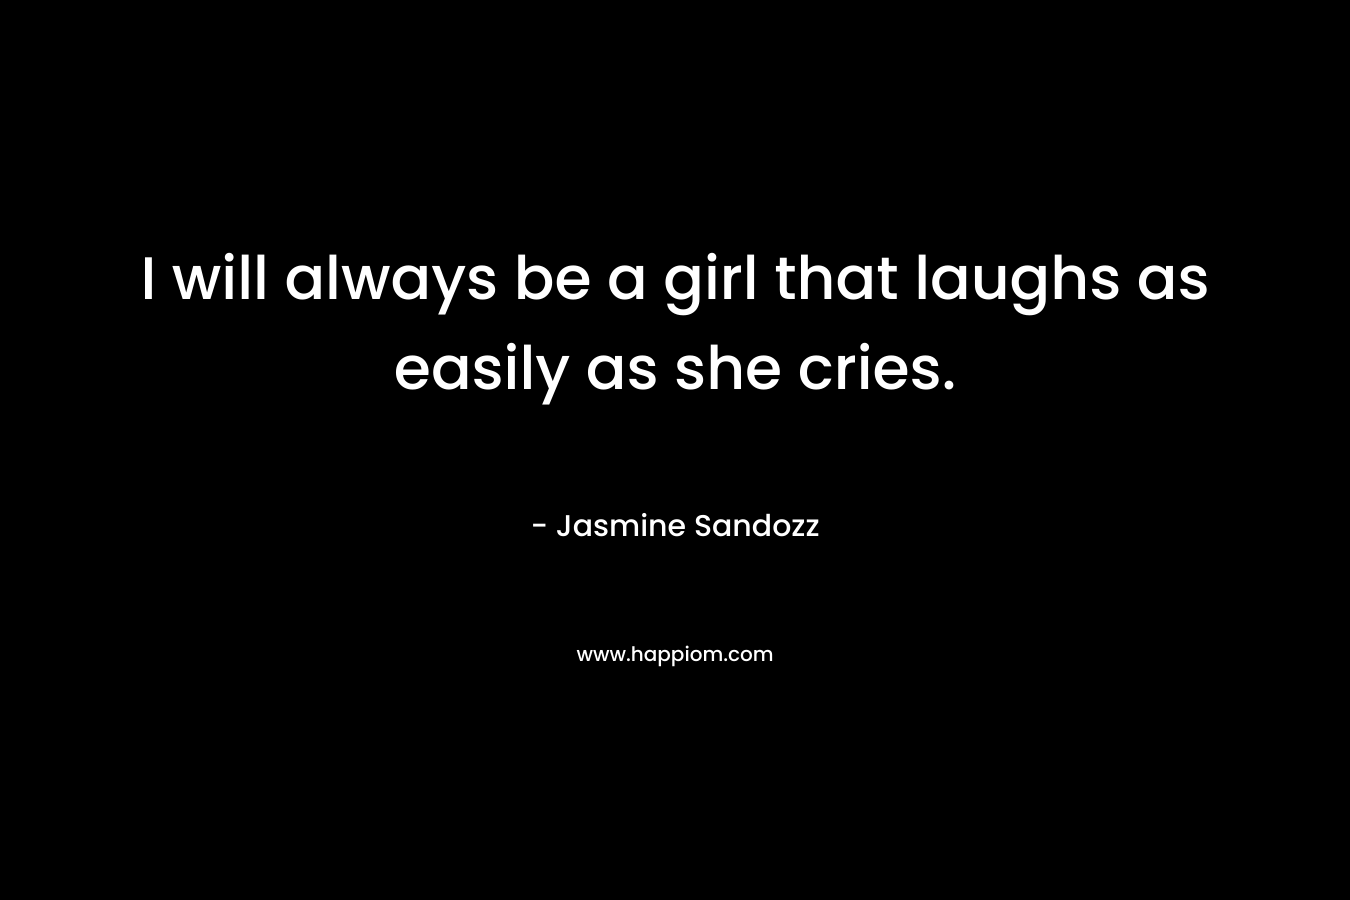 I will always be a girl that laughs as easily as she cries.